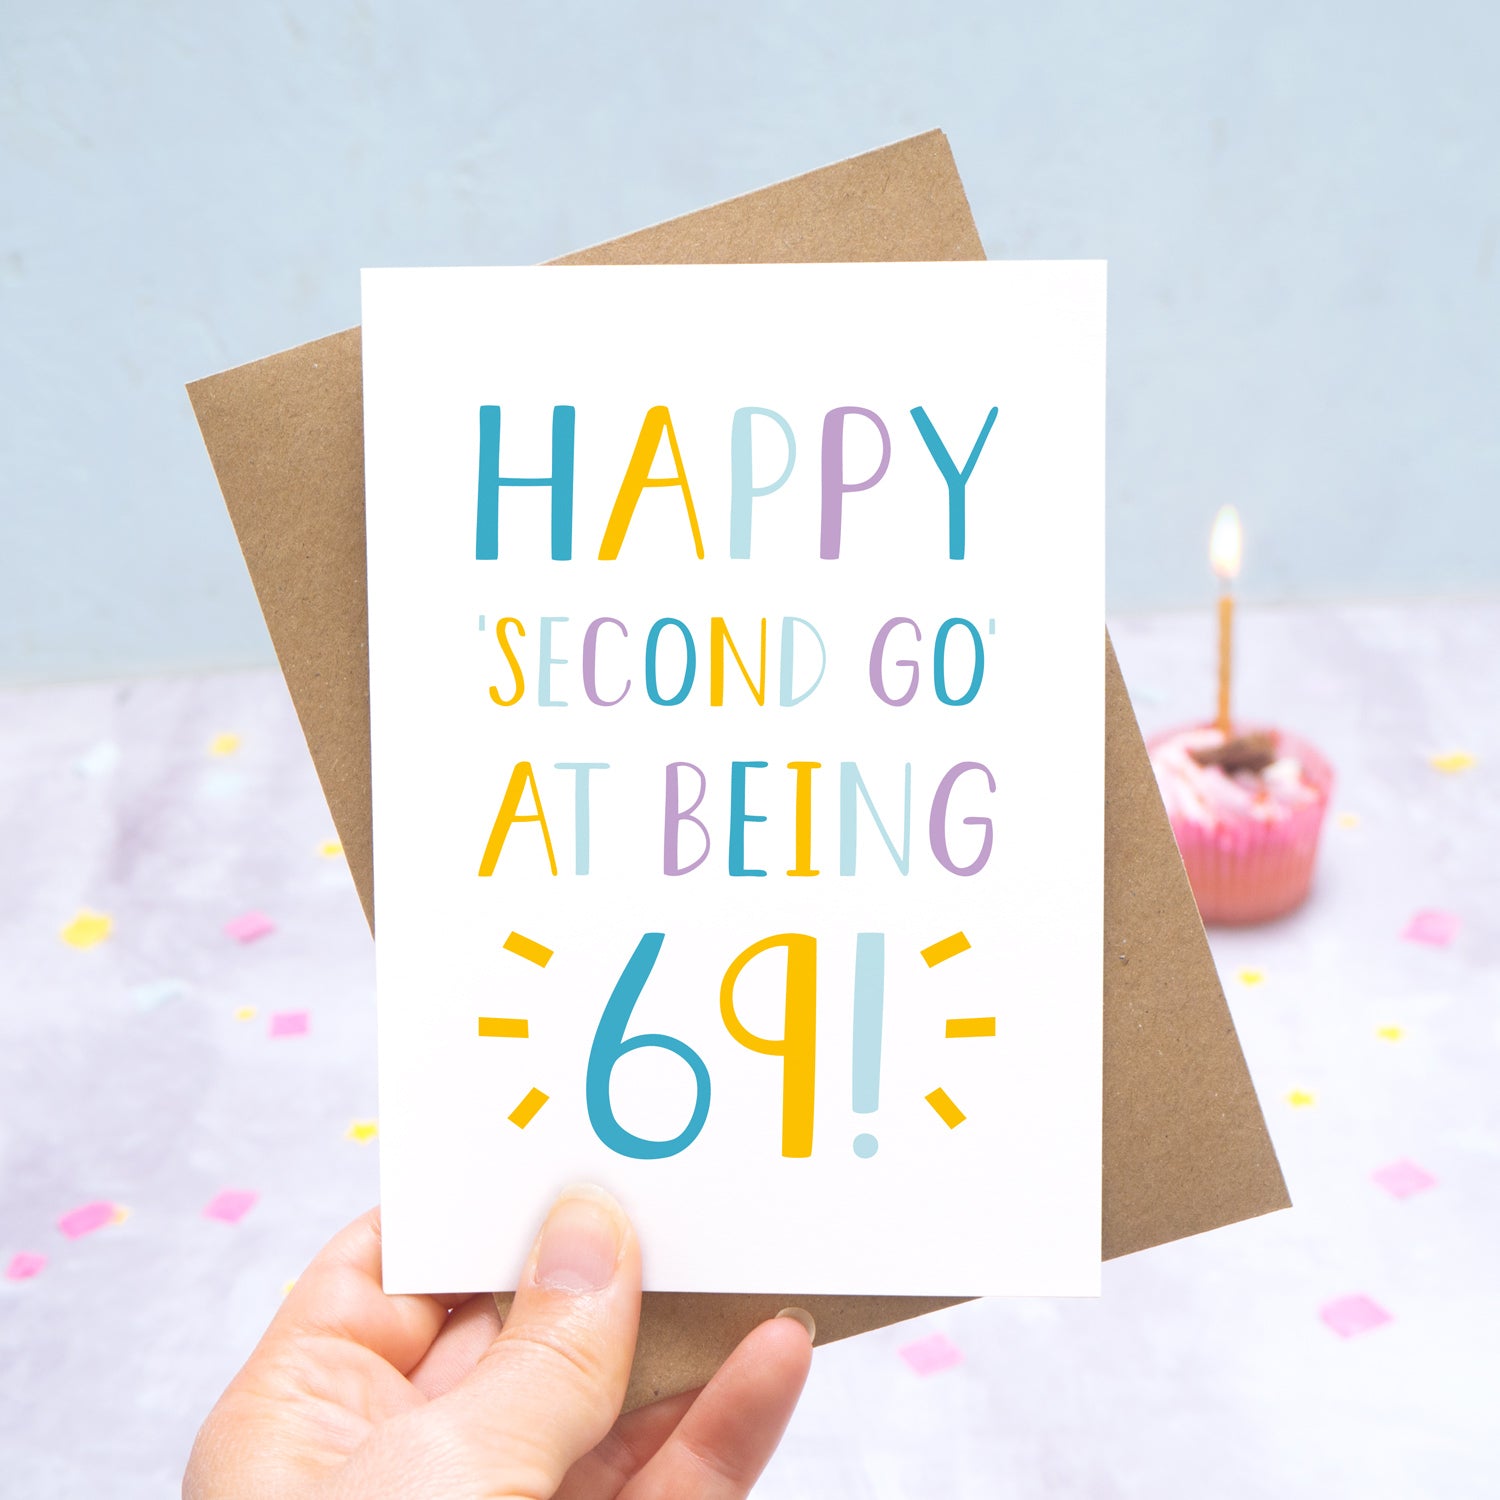 Happy second go at being 69 - milestone age card in blue, yellow and purple photographed on a grey and blue background with a cupcake and burning candle.